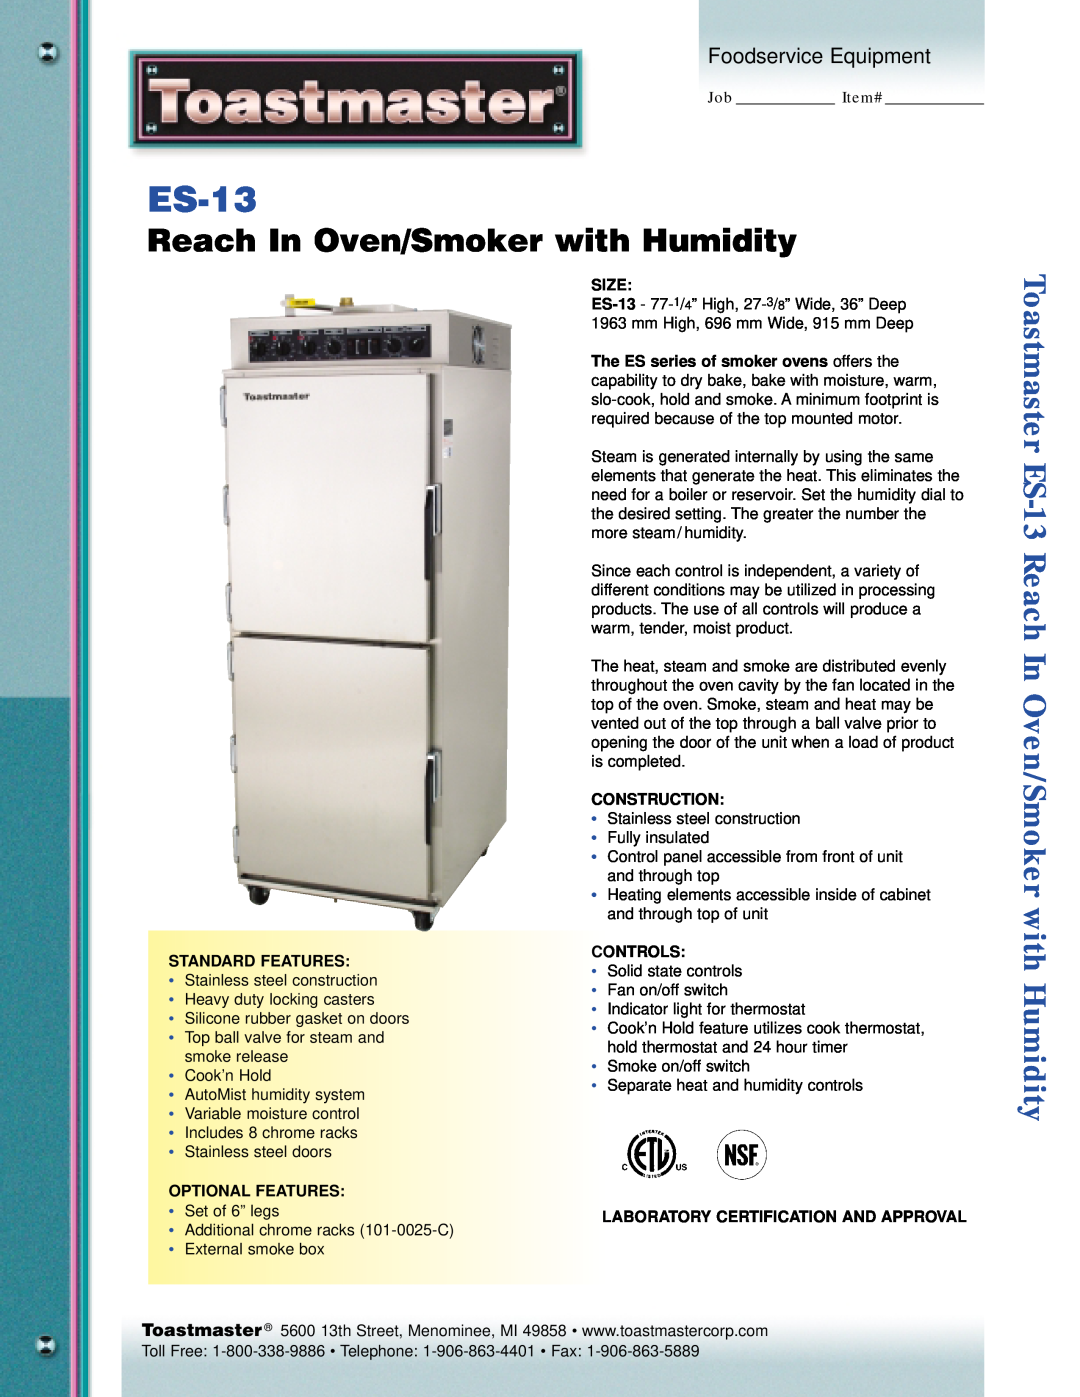 Toastmaster ES-13 manual Reach In Oven/Smoker with Humidity, Foodservice Equipment 